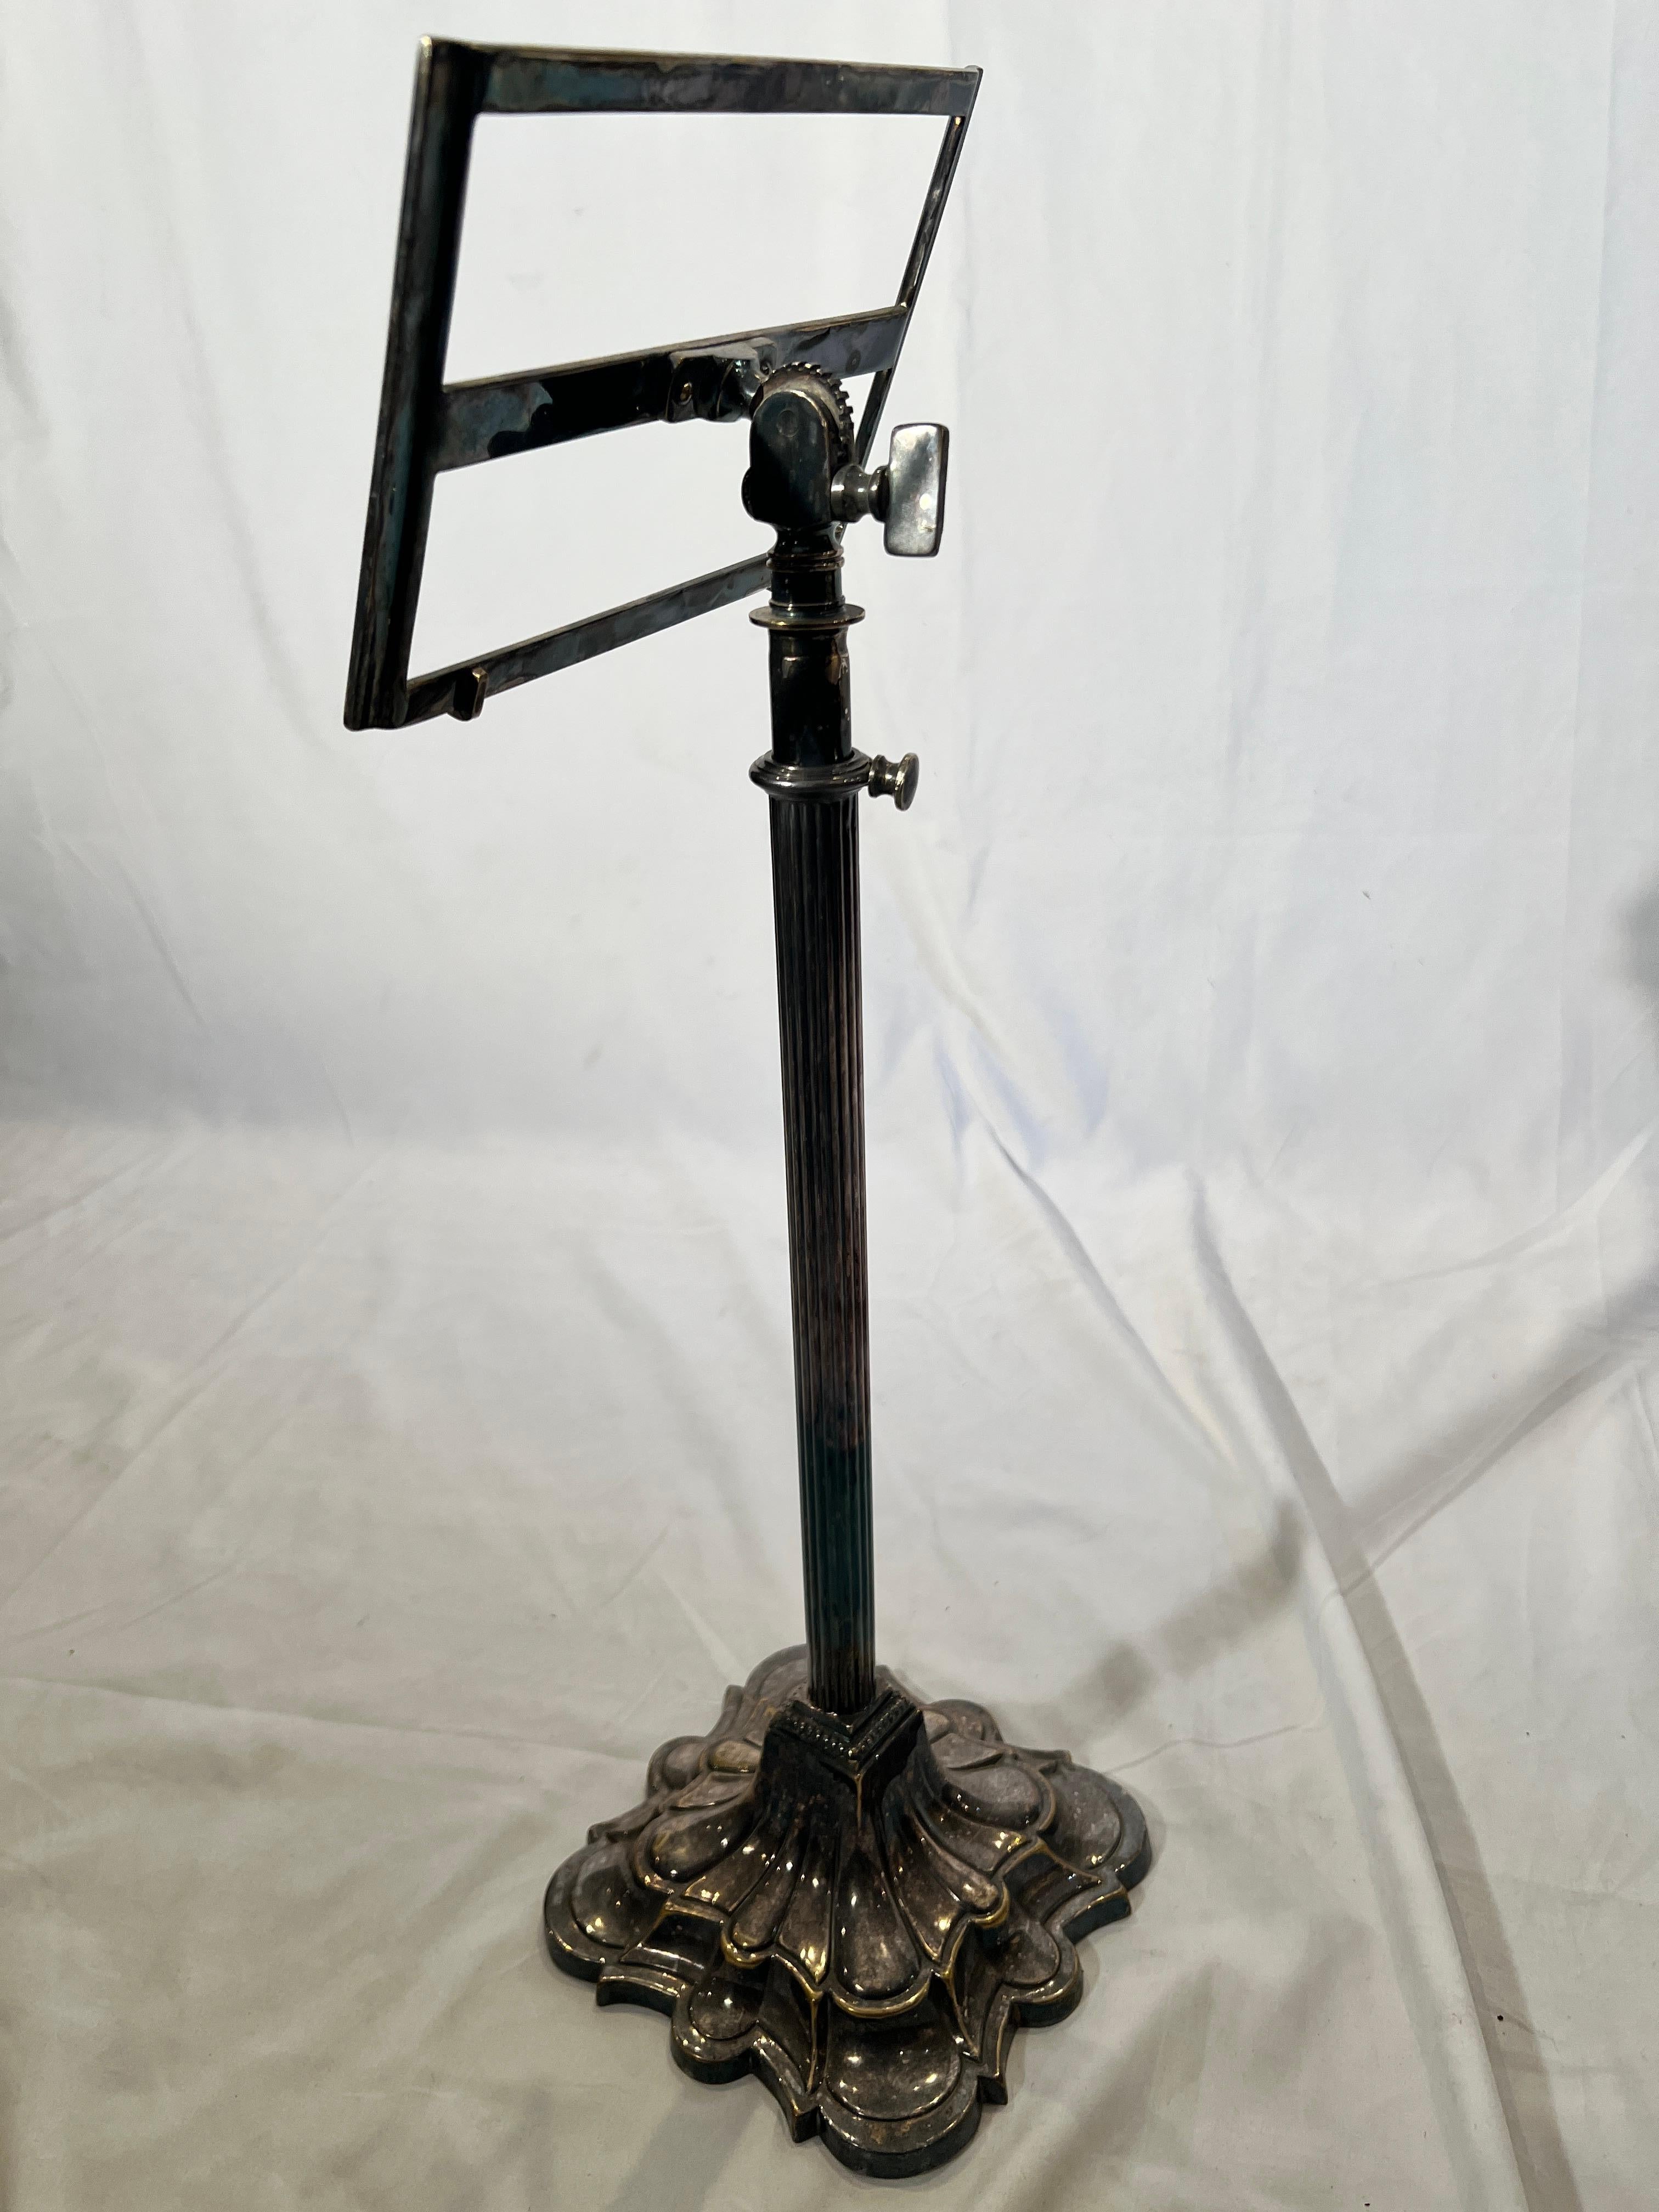 Antique Silver Plate Easel circa 1900-1910 In Good Condition For Sale In New Orleans, LA